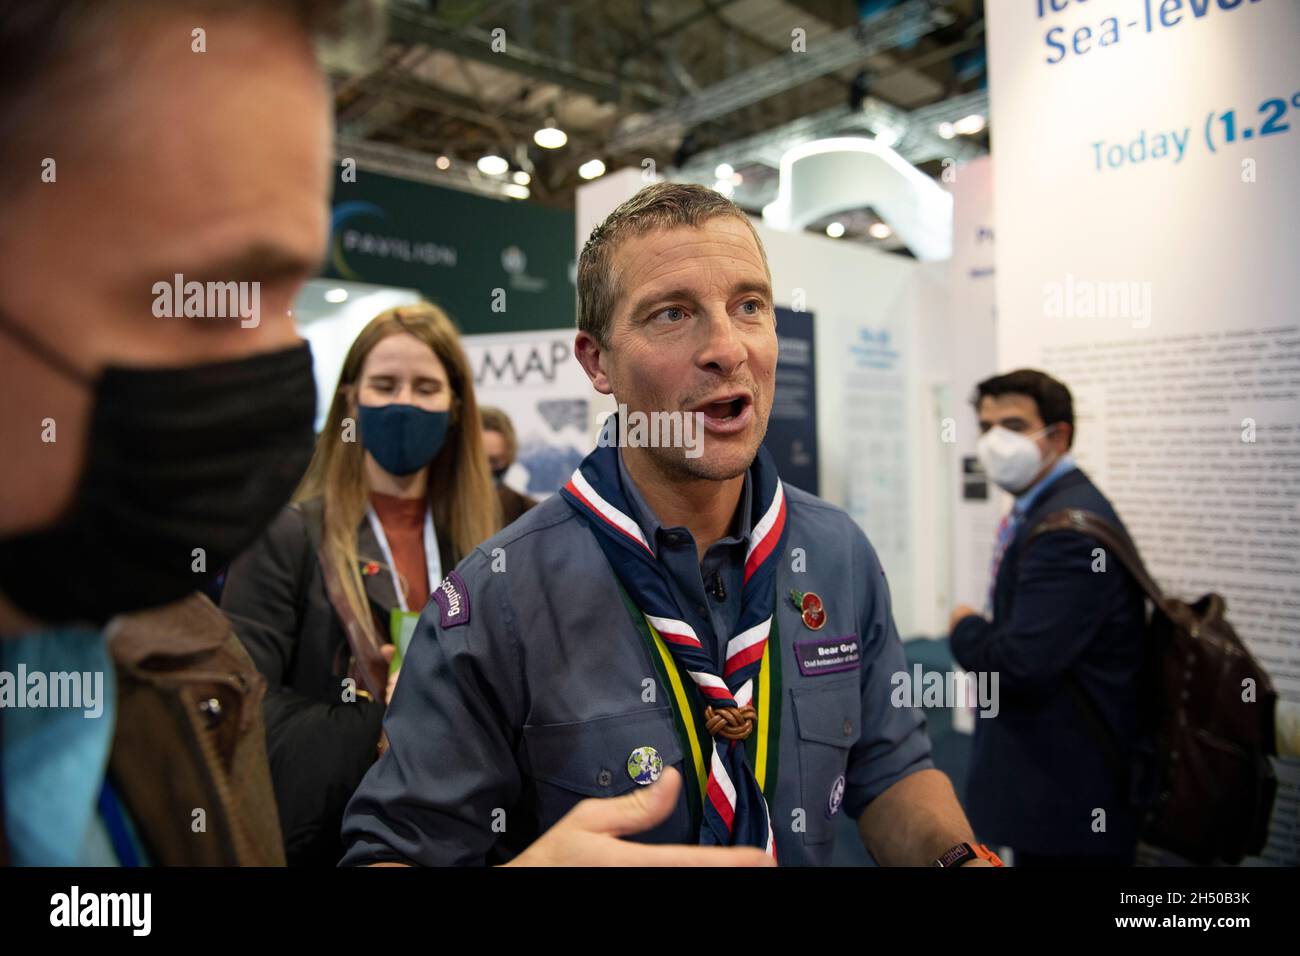 Glasgow, Scotland, UK. 5th Nov, 2021. PICTURED: Bear Grylls OBE, British adventurer and the UK's head Scout, seen at United Kingdom Pavillion at COP26 Climate Change Conference giving a speech. Edward Michael "Bear" Grylls OBE is a British adventurer, writer, television presenter and businessman. Grylls first drew attention after embarking on a number of adventures, and then became widely known for his television series Man vs. Wild. Credit: Colin Fisher/Alamy Live News Stock Photo